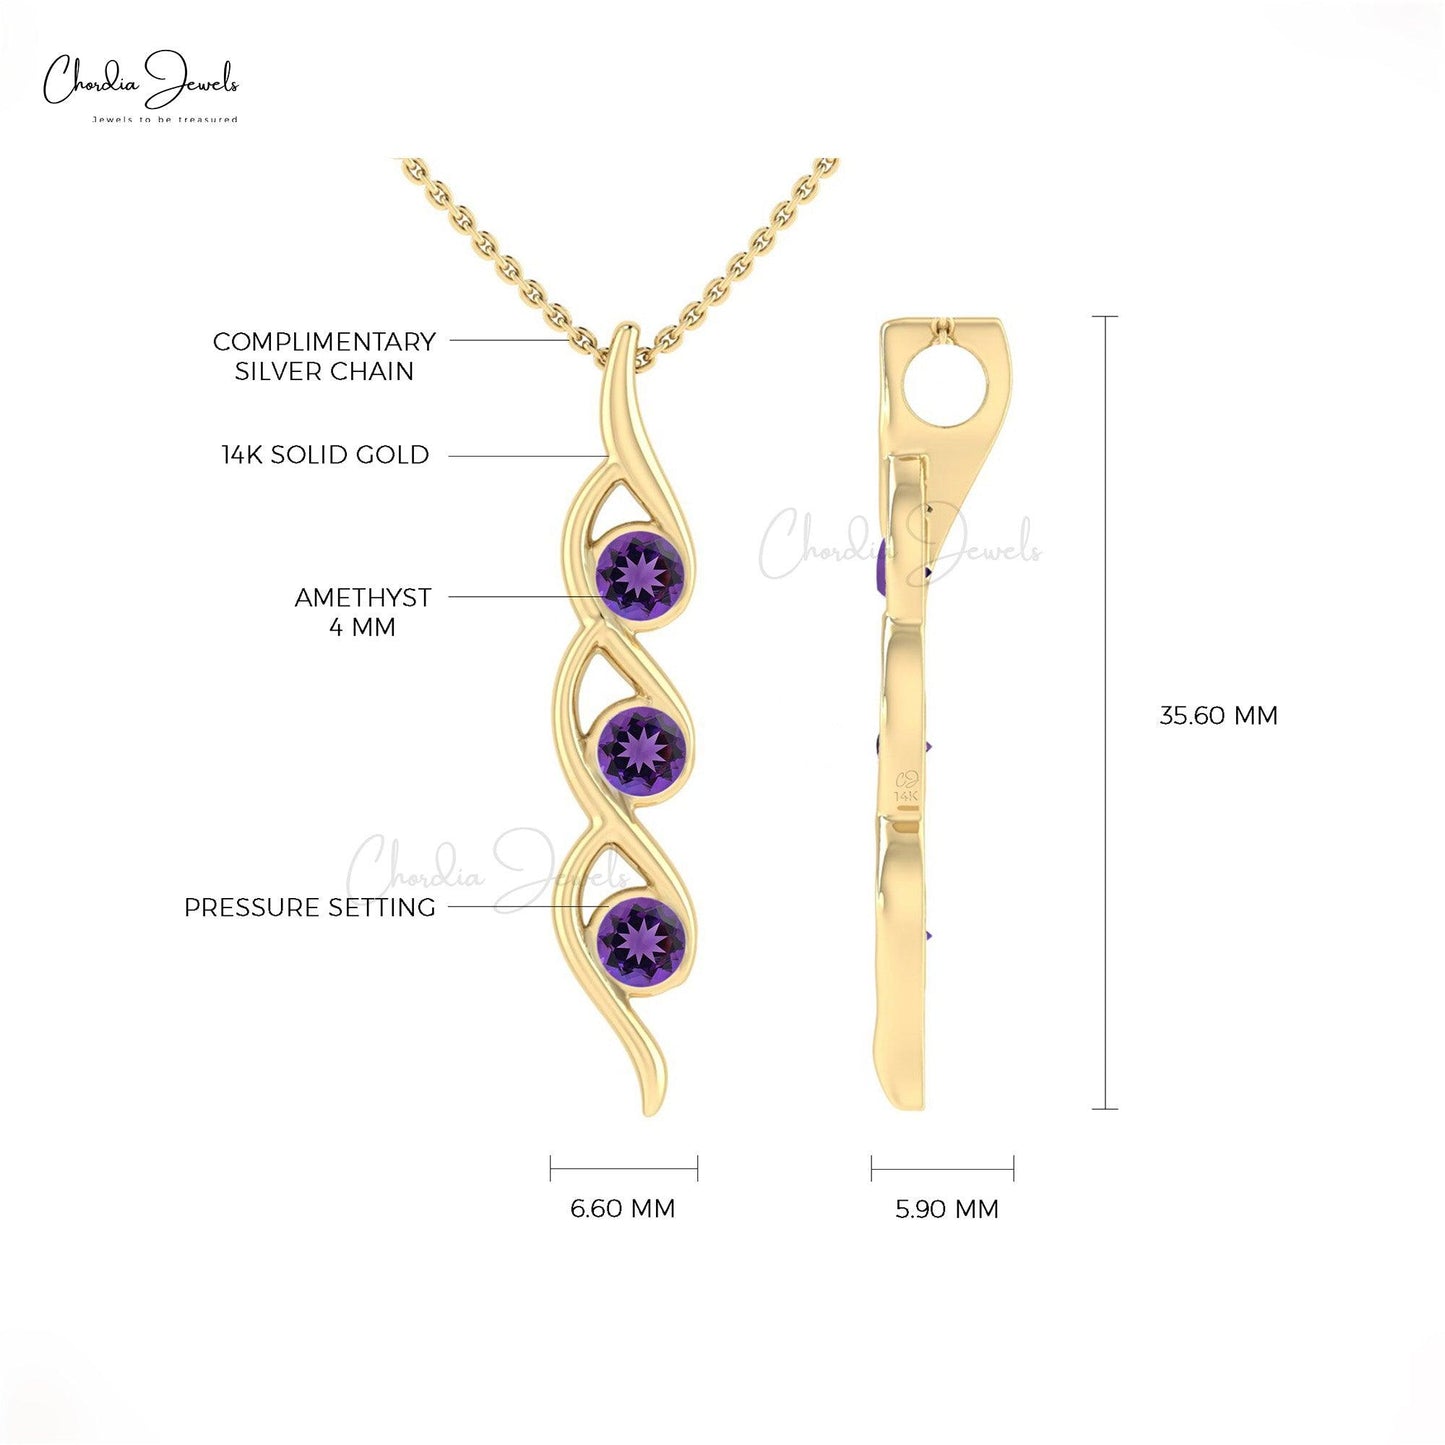 0.66 Carat Natural Amethyst Pendant, 14k Solid Gold 3 Stone Pendant, February Birthstone Pendant Gift for Wife - Chordia Jewels